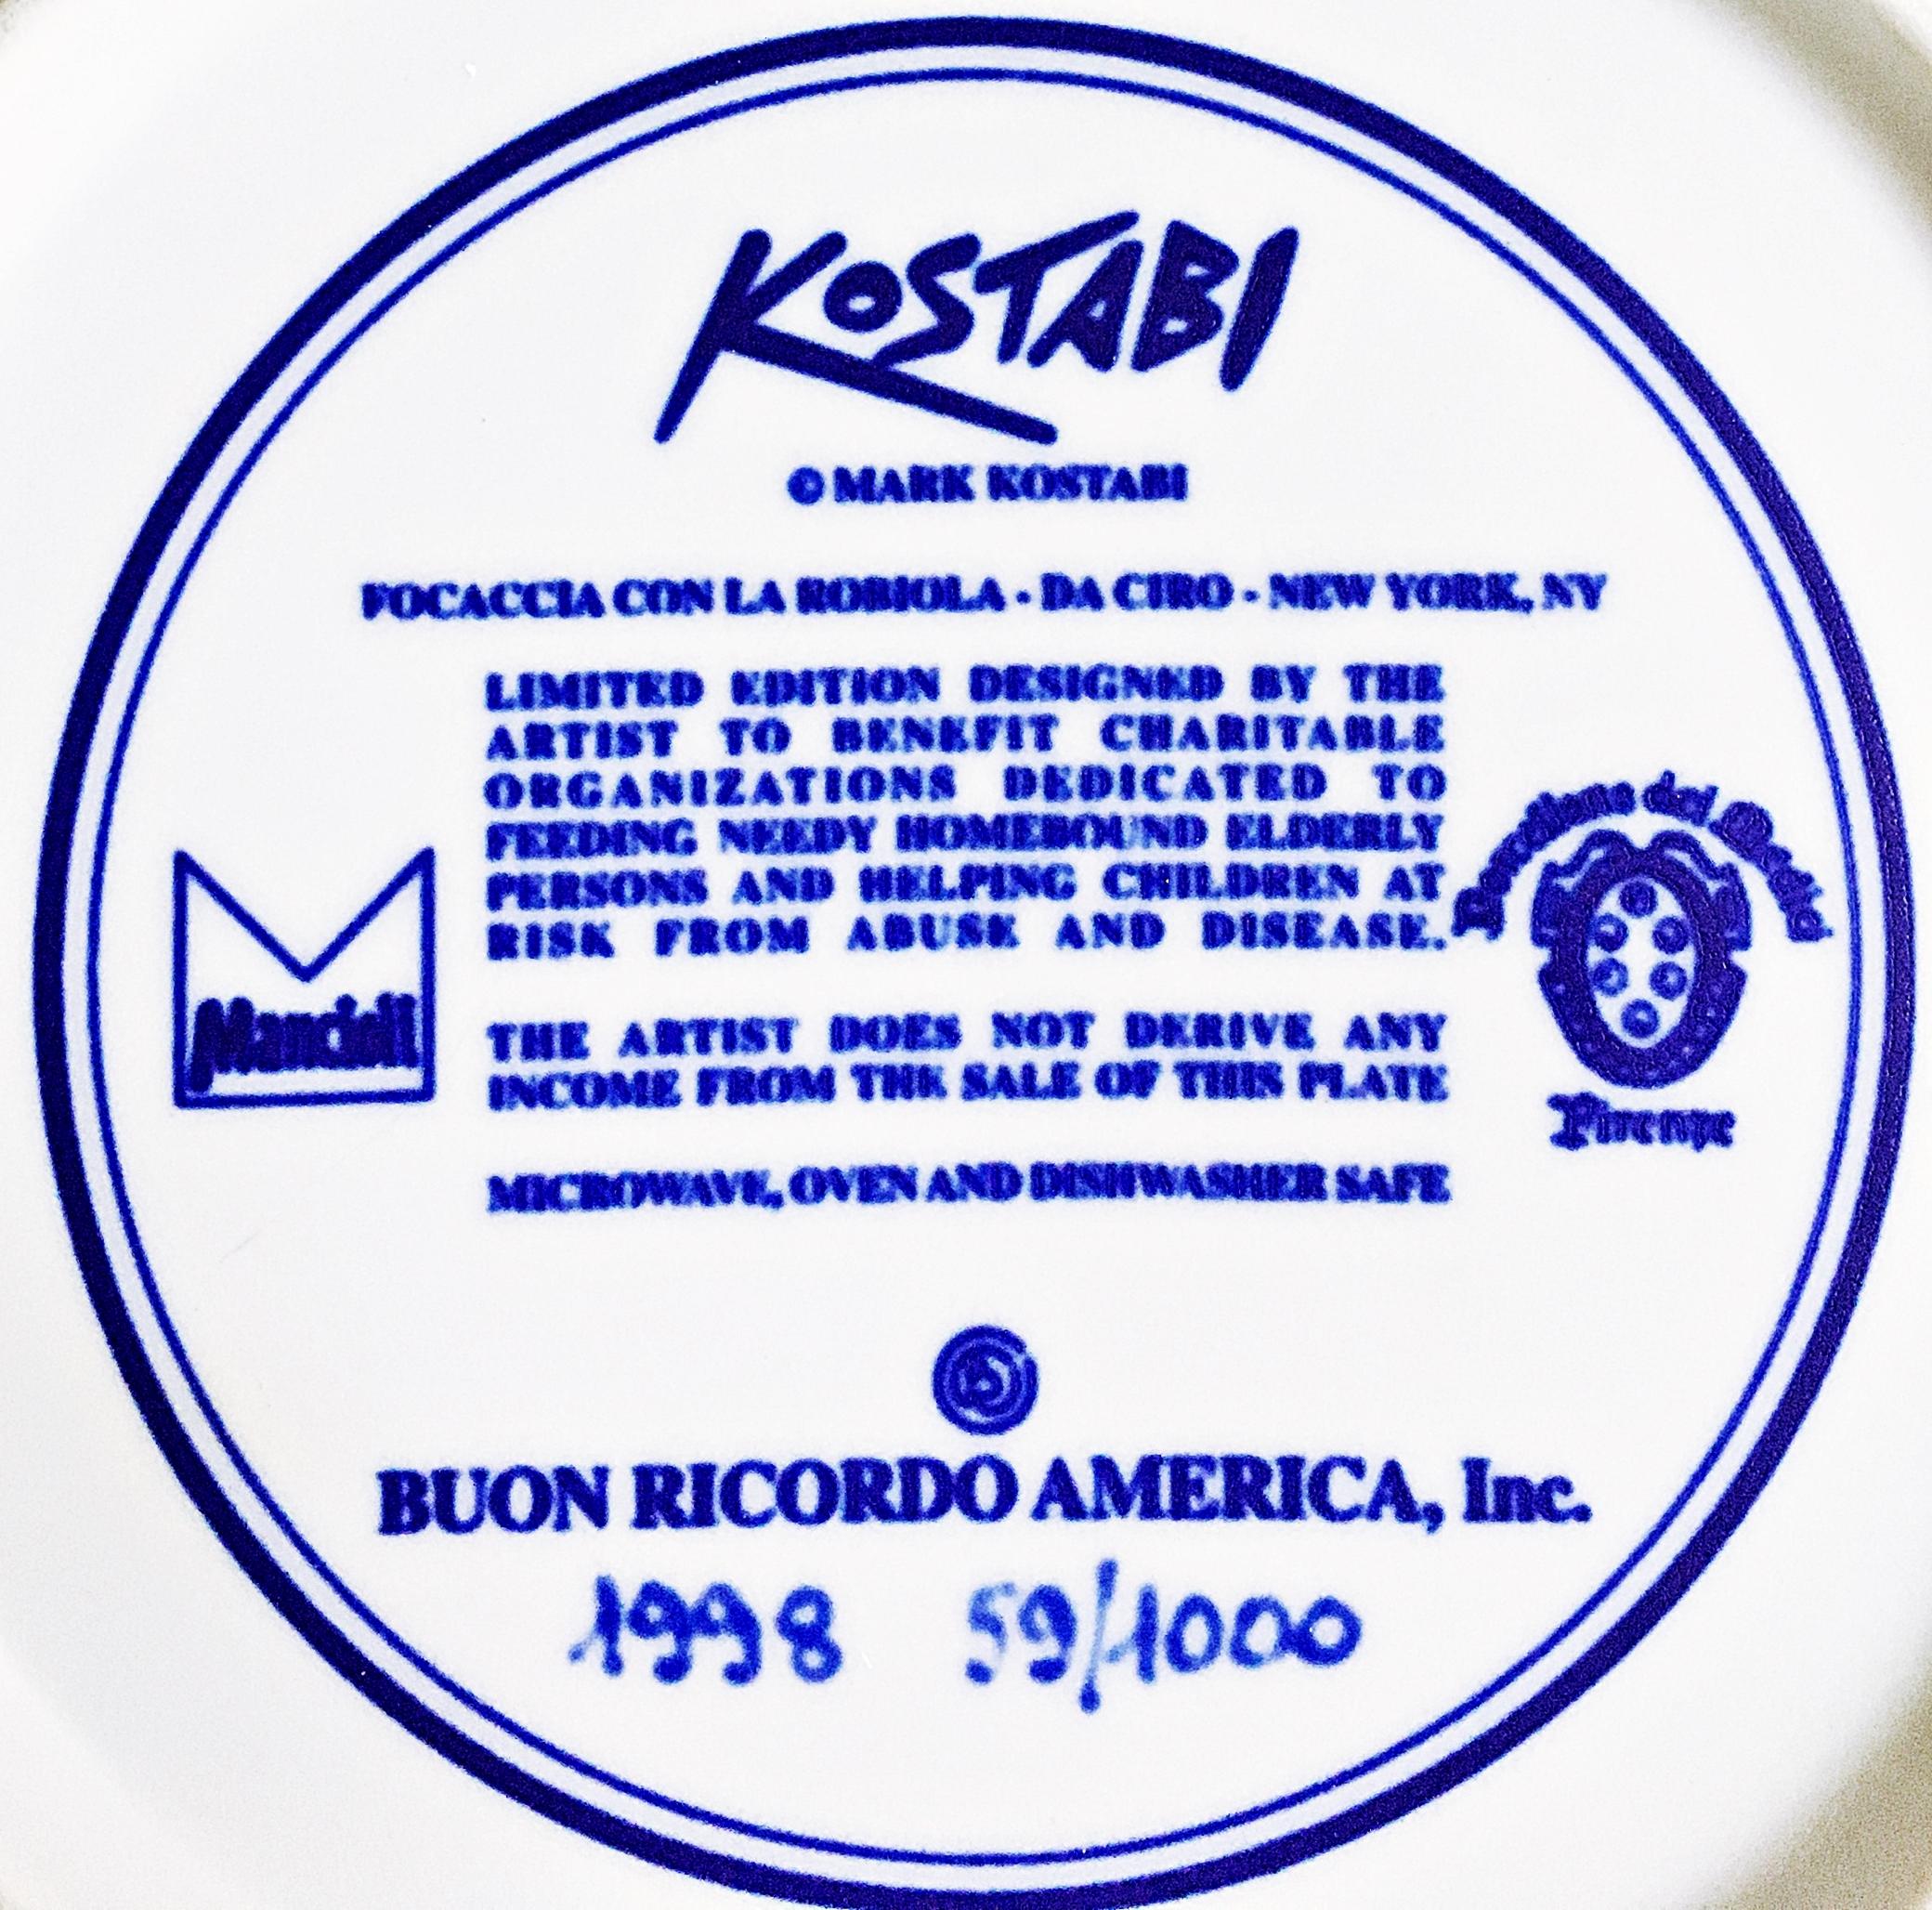 Mark Kostabi
Focaccia Alla Robiola - Da Ciro - New York, NY, 1998
Ceramic Plate. 
Artist signature fired into the plate on the front and back and numbered 59 of 1000. 
10 1/5 inch diameter x 1/4 inch height
Unframed
Makes a memorable and very